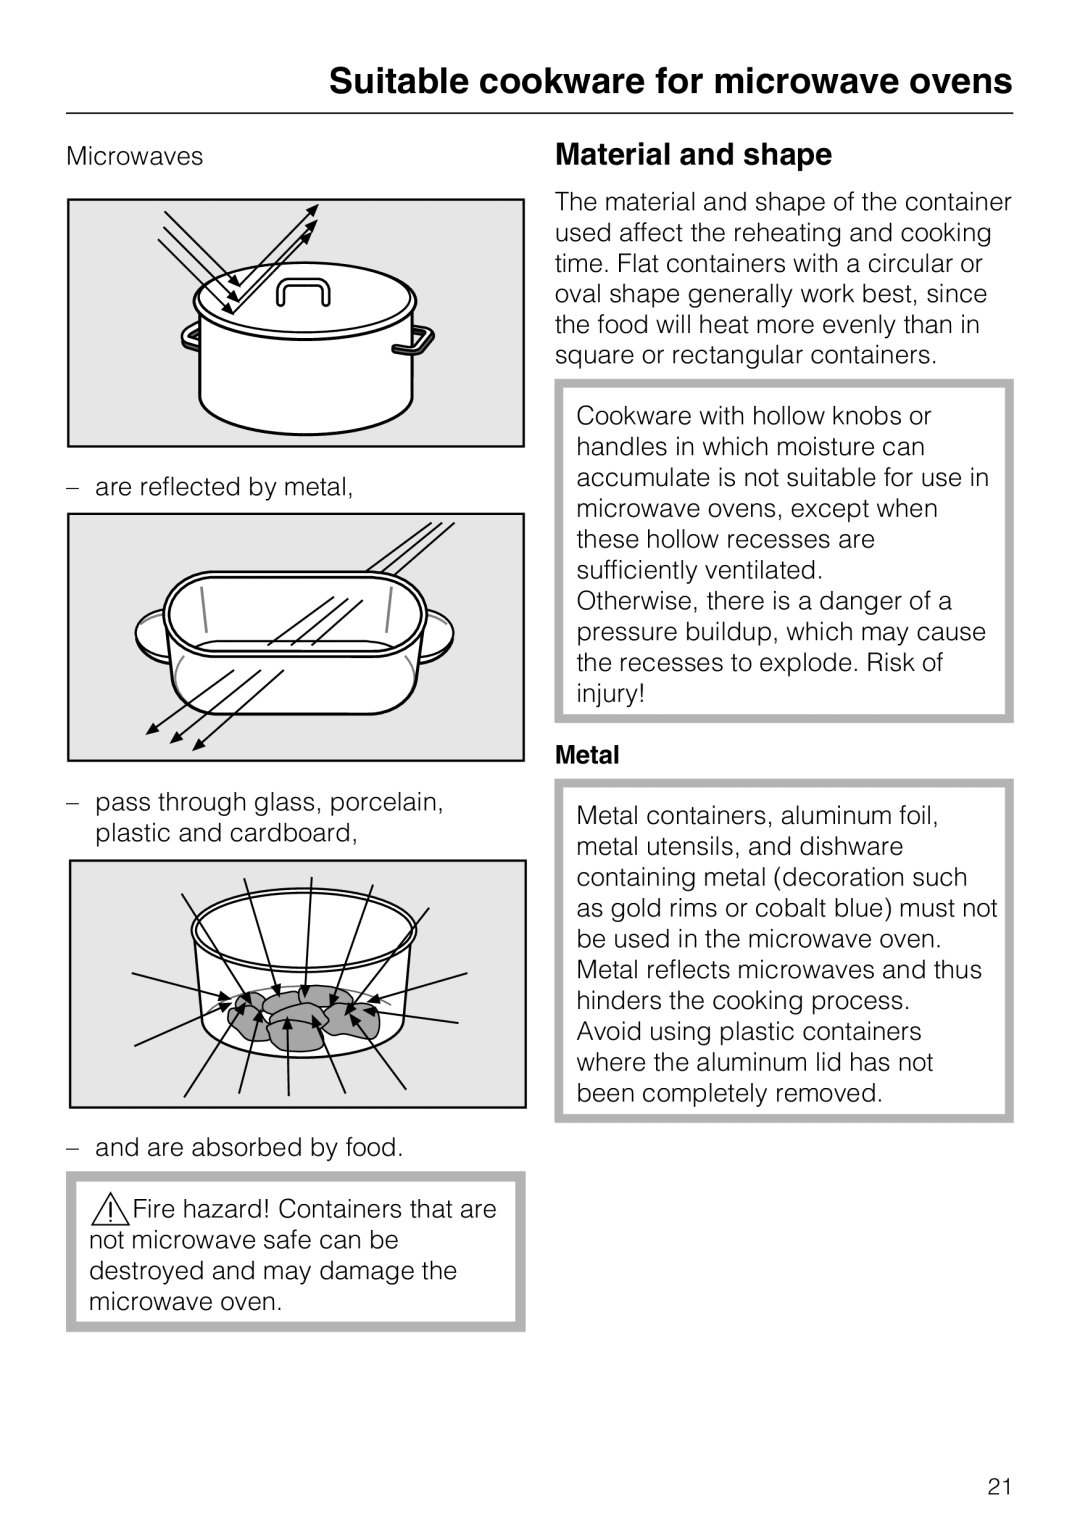 Miele 09 798 350 installation instructions Suitable cookware for microwave ovens, Material and shape, Metal 